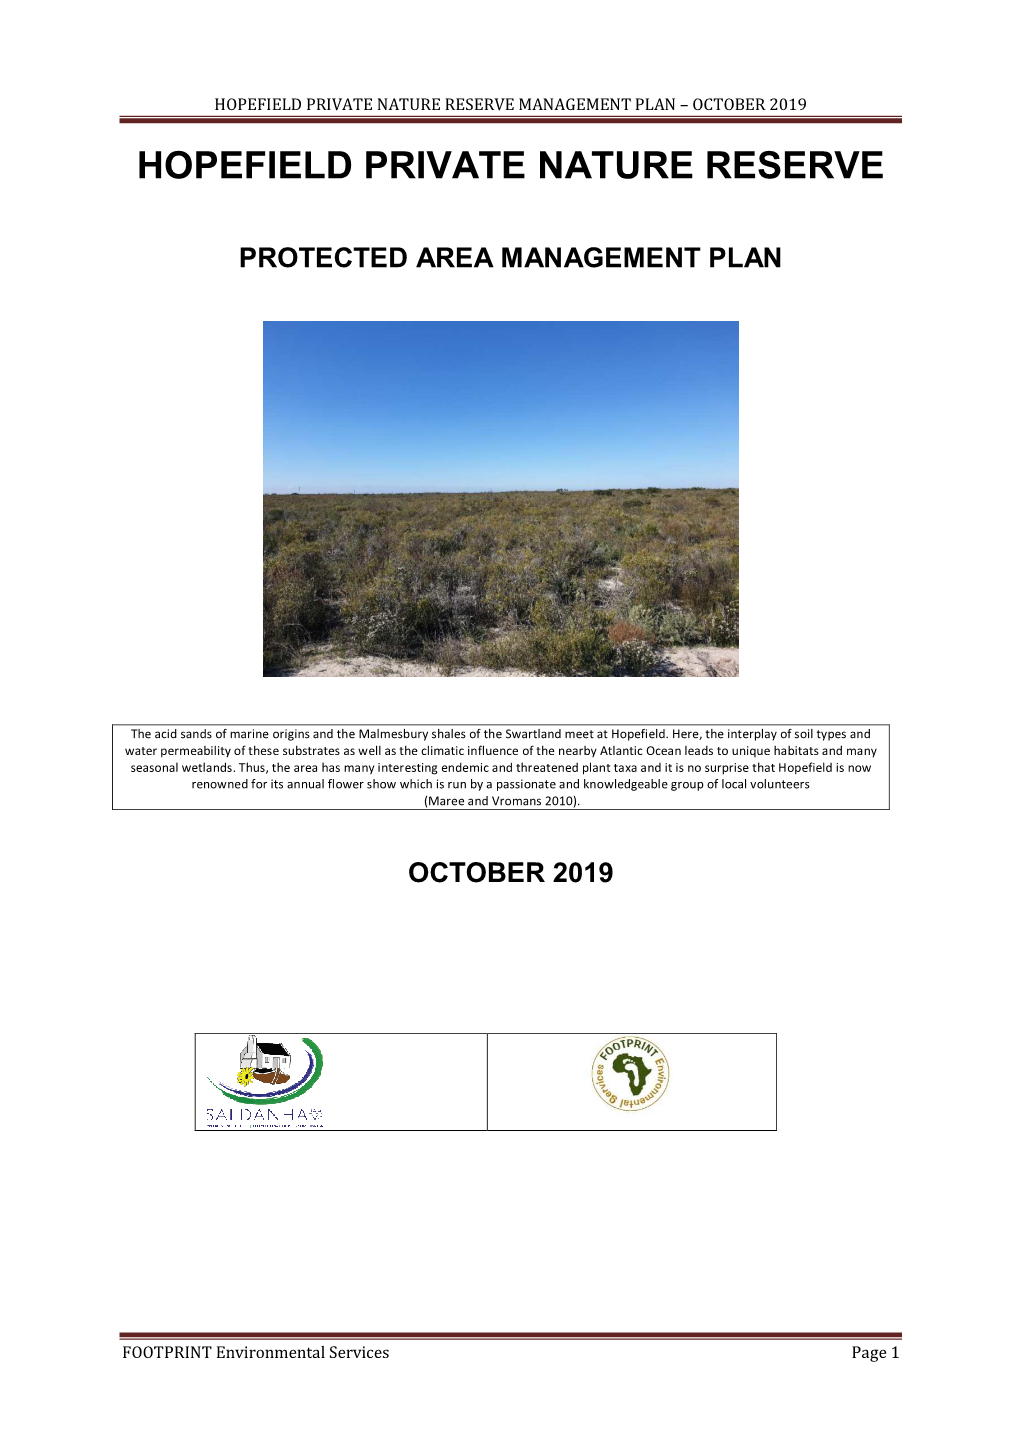 Hopefield Private Nature Reserve Protected Area Management Plan